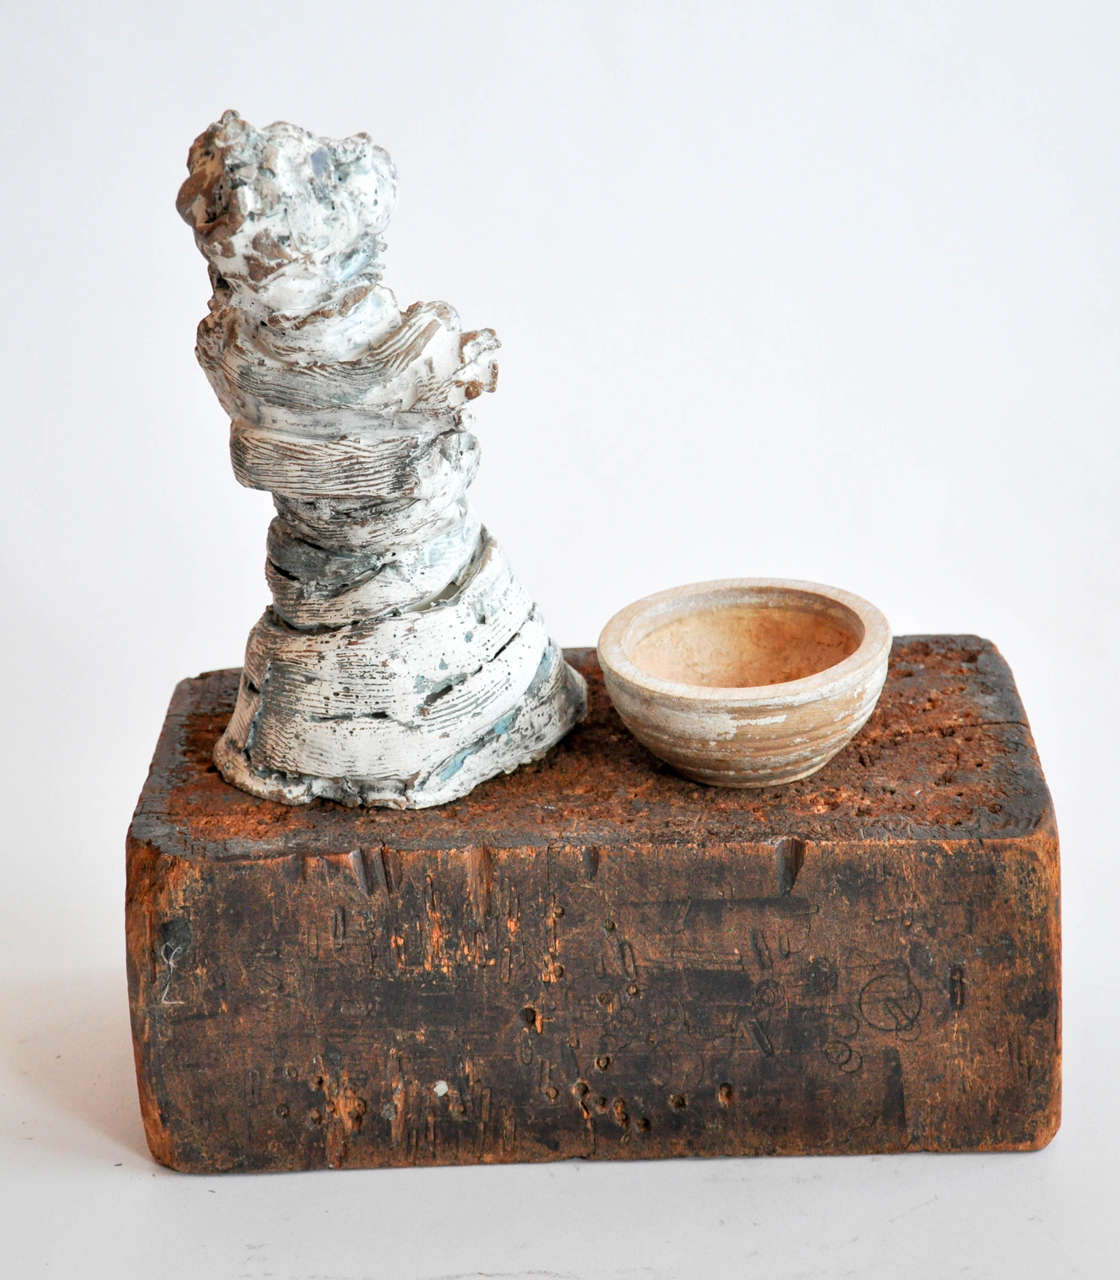 Trio -  Sculpture by British Artist Corinna Button, Primitive Shoemakers Plateau and Small Wooden Bowl.